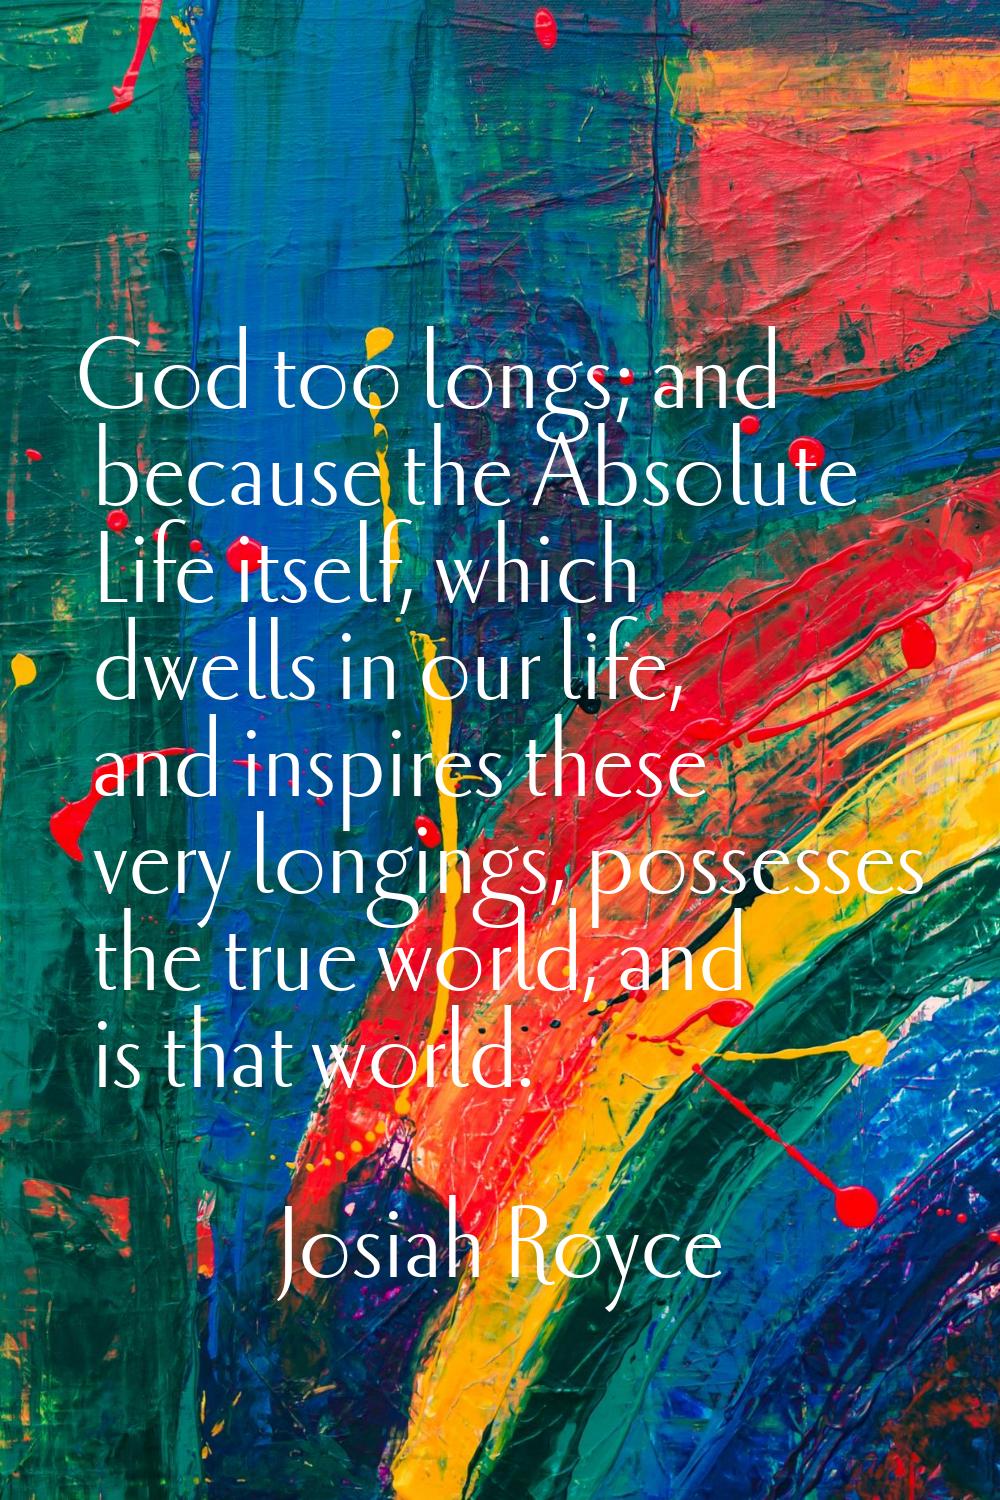 God too longs; and because the Absolute Life itself, which dwells in our life, and inspires these v